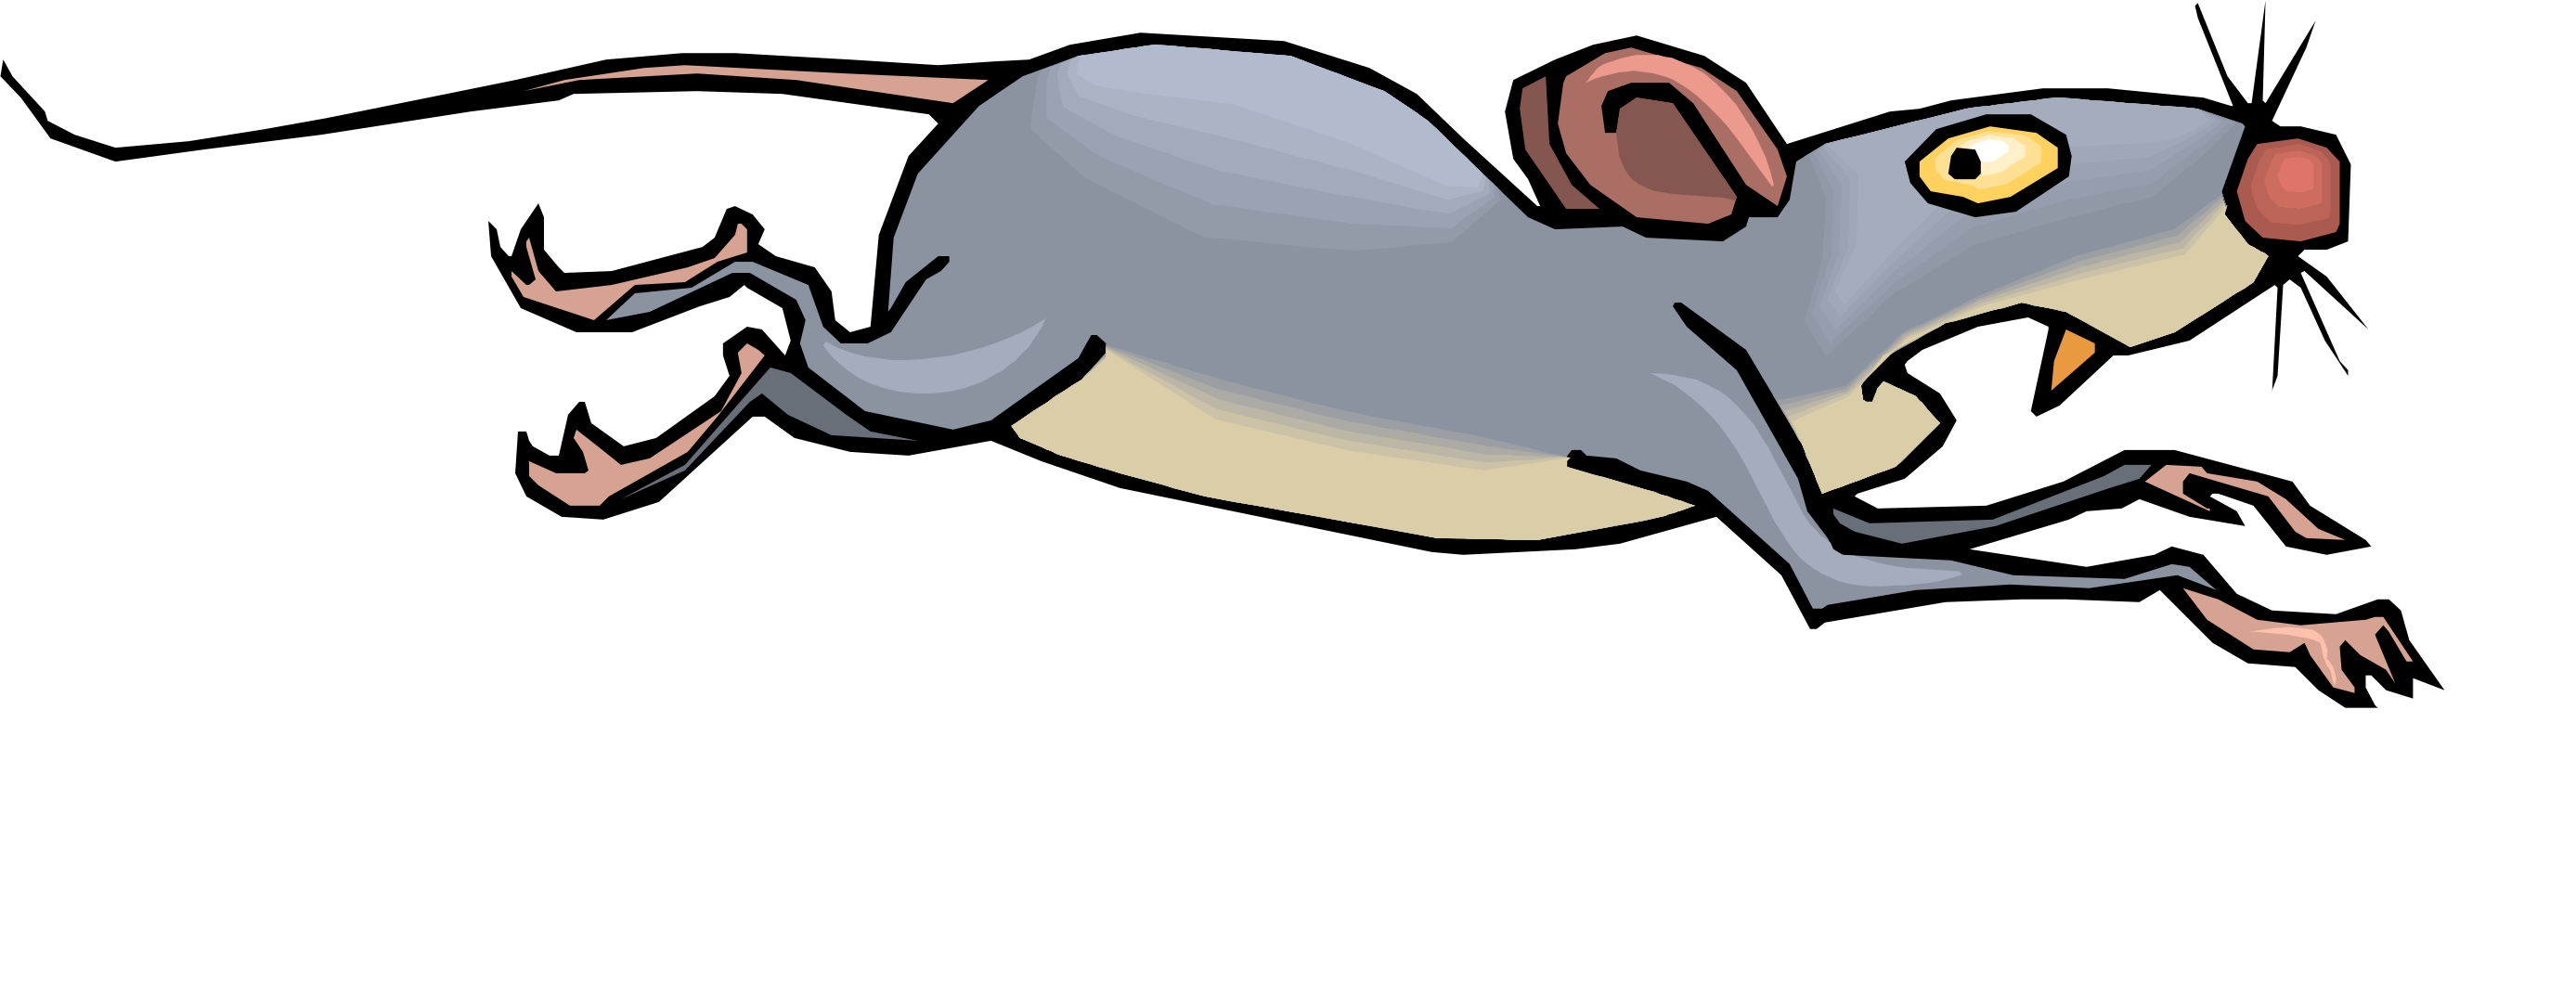 Cartoon Mouse Picture - Clipart library